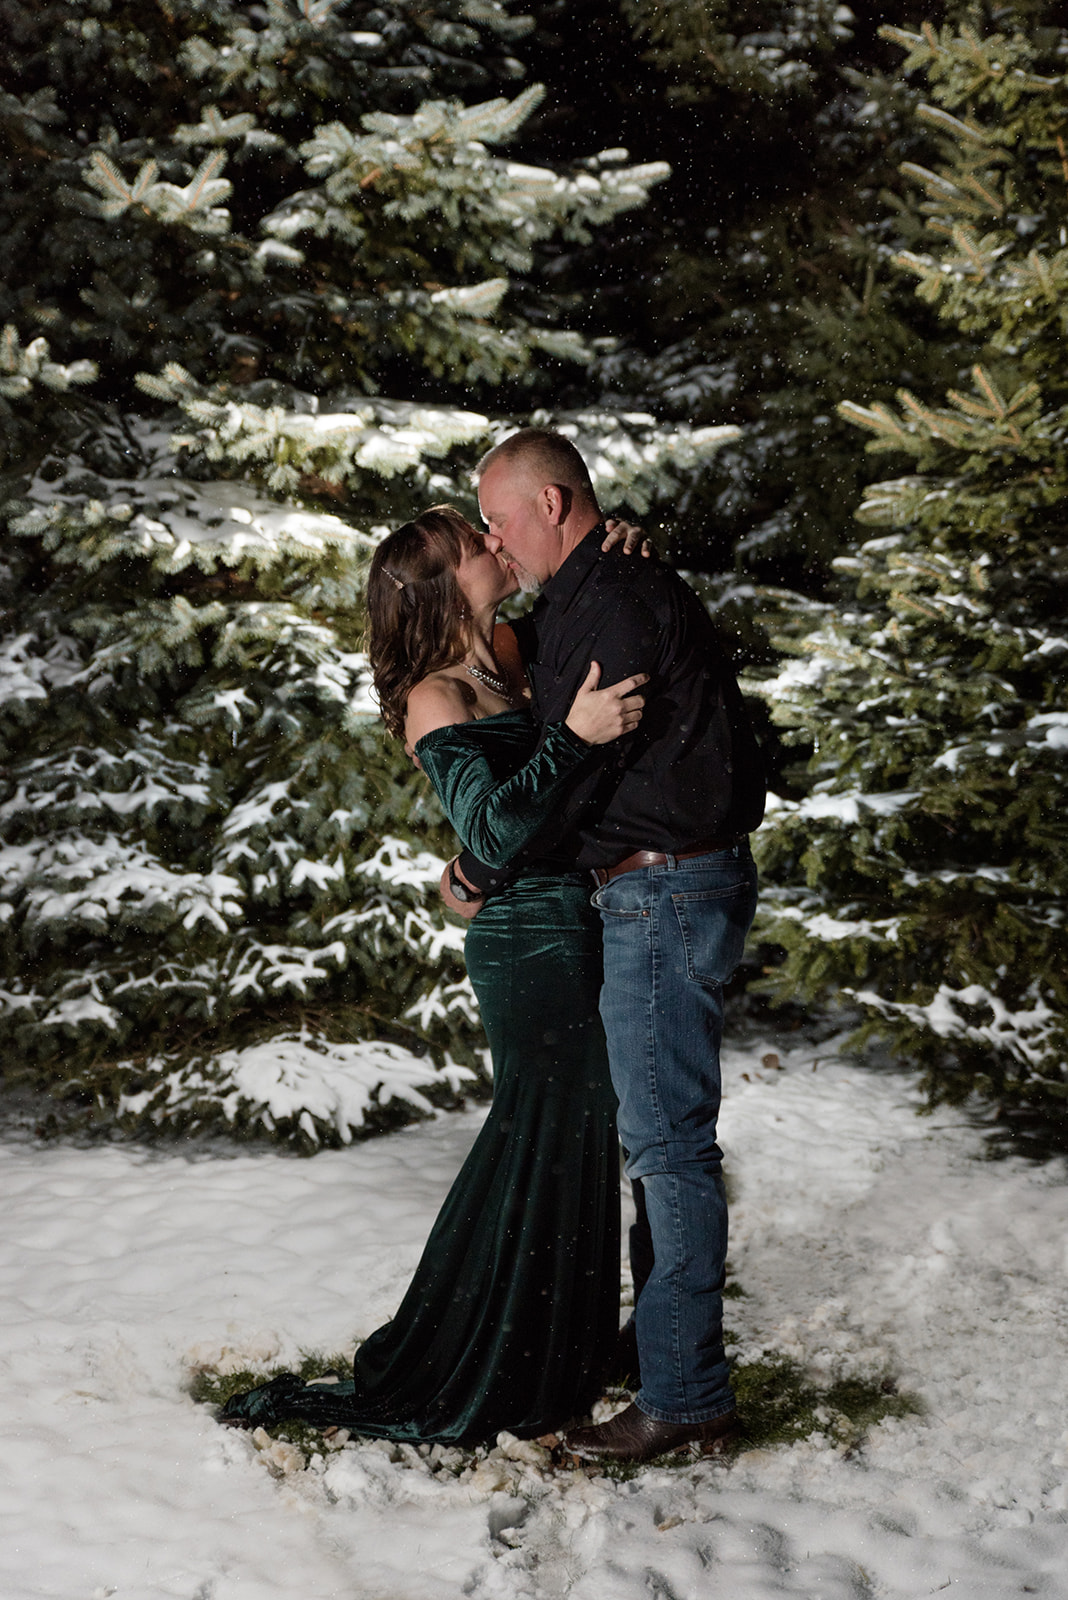 Husband and Wife kiss in the snowy night